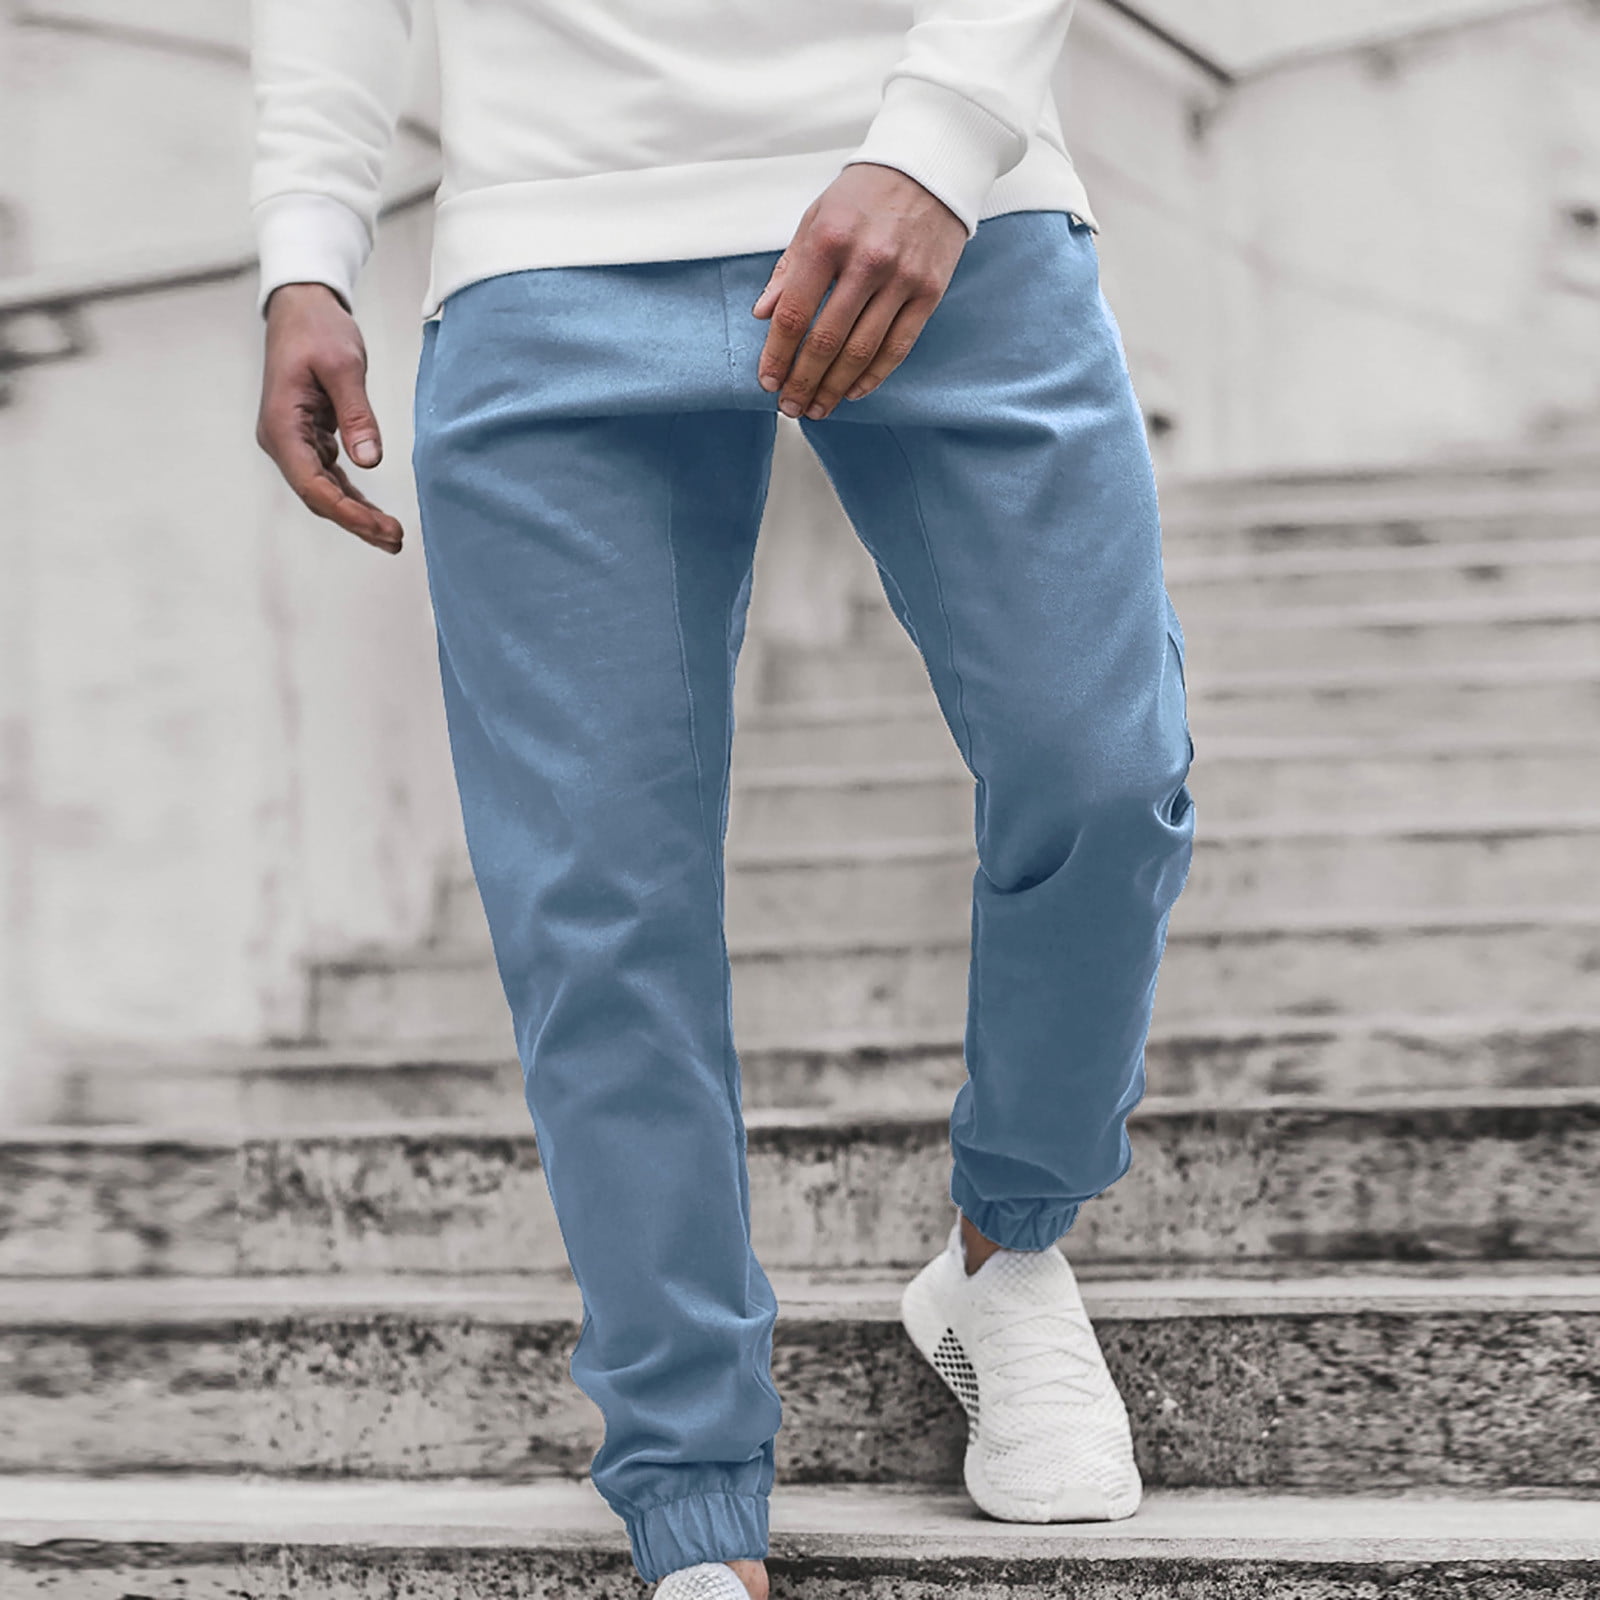 Light blue pants | Mens outfits, Well dressed men, Mens fashion summer